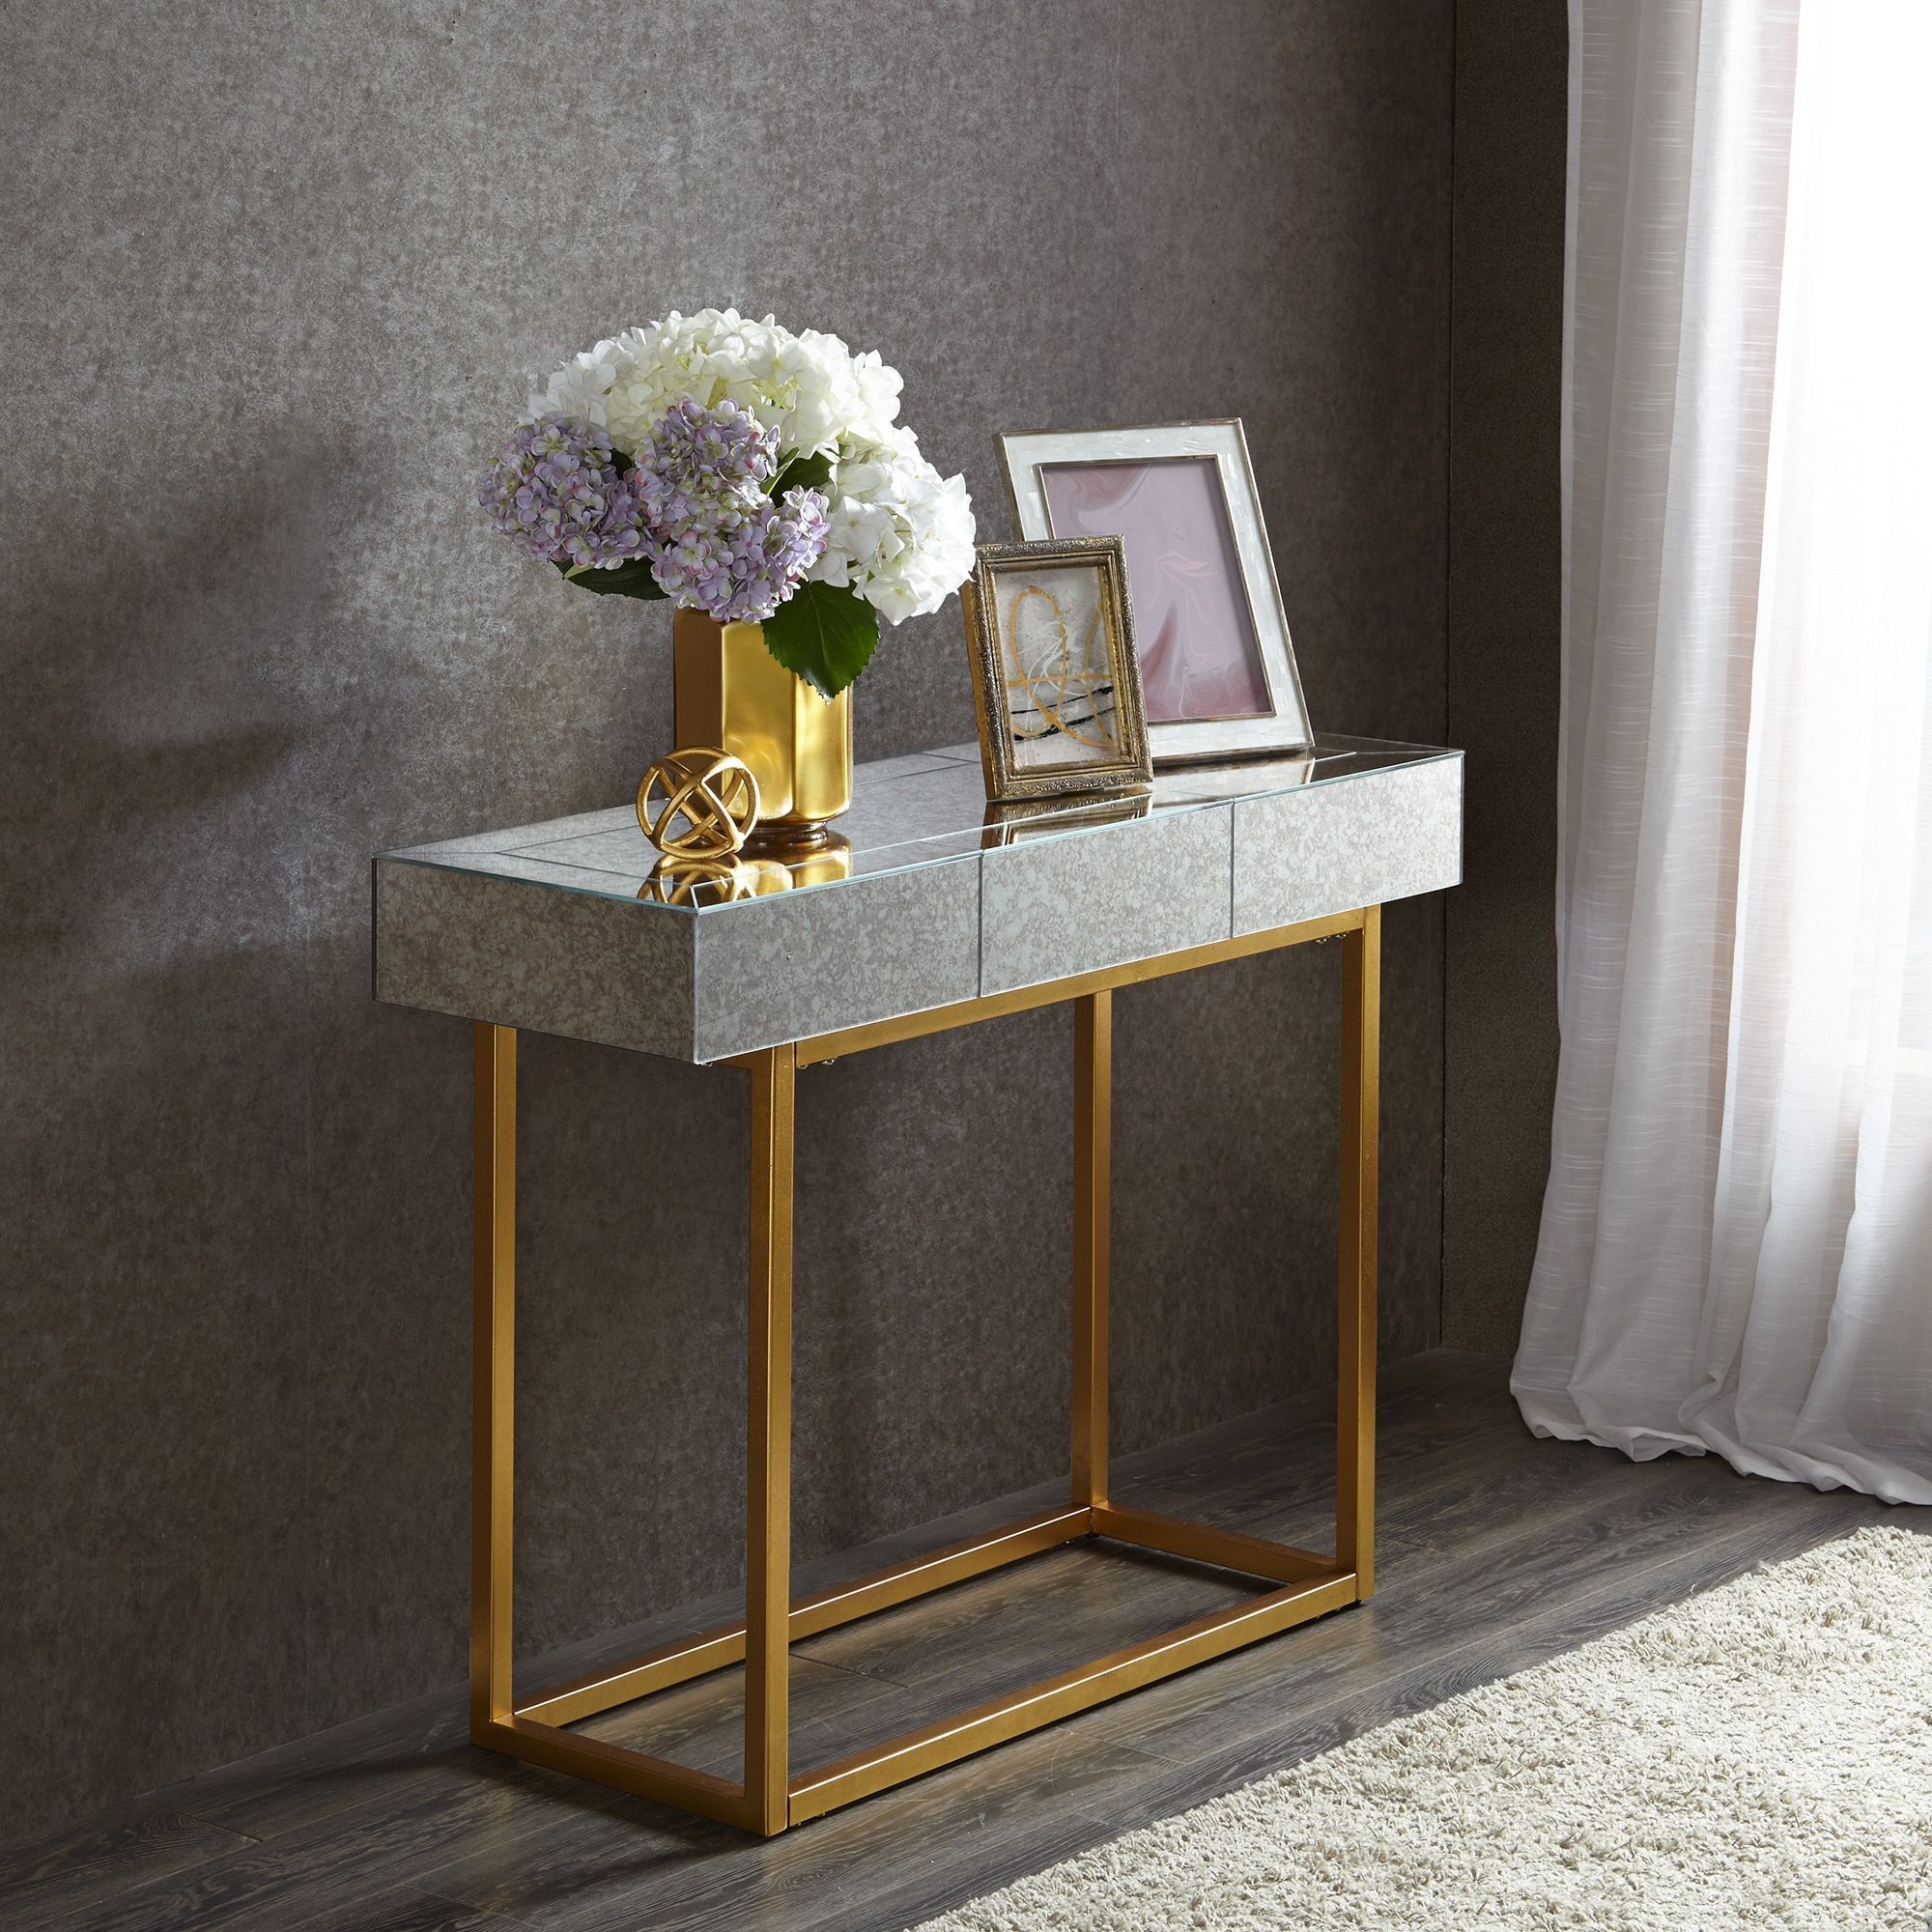 Sofa For Most Popular Gold And Mirror Modern Cube End Tables (Gallery 8 of 20)